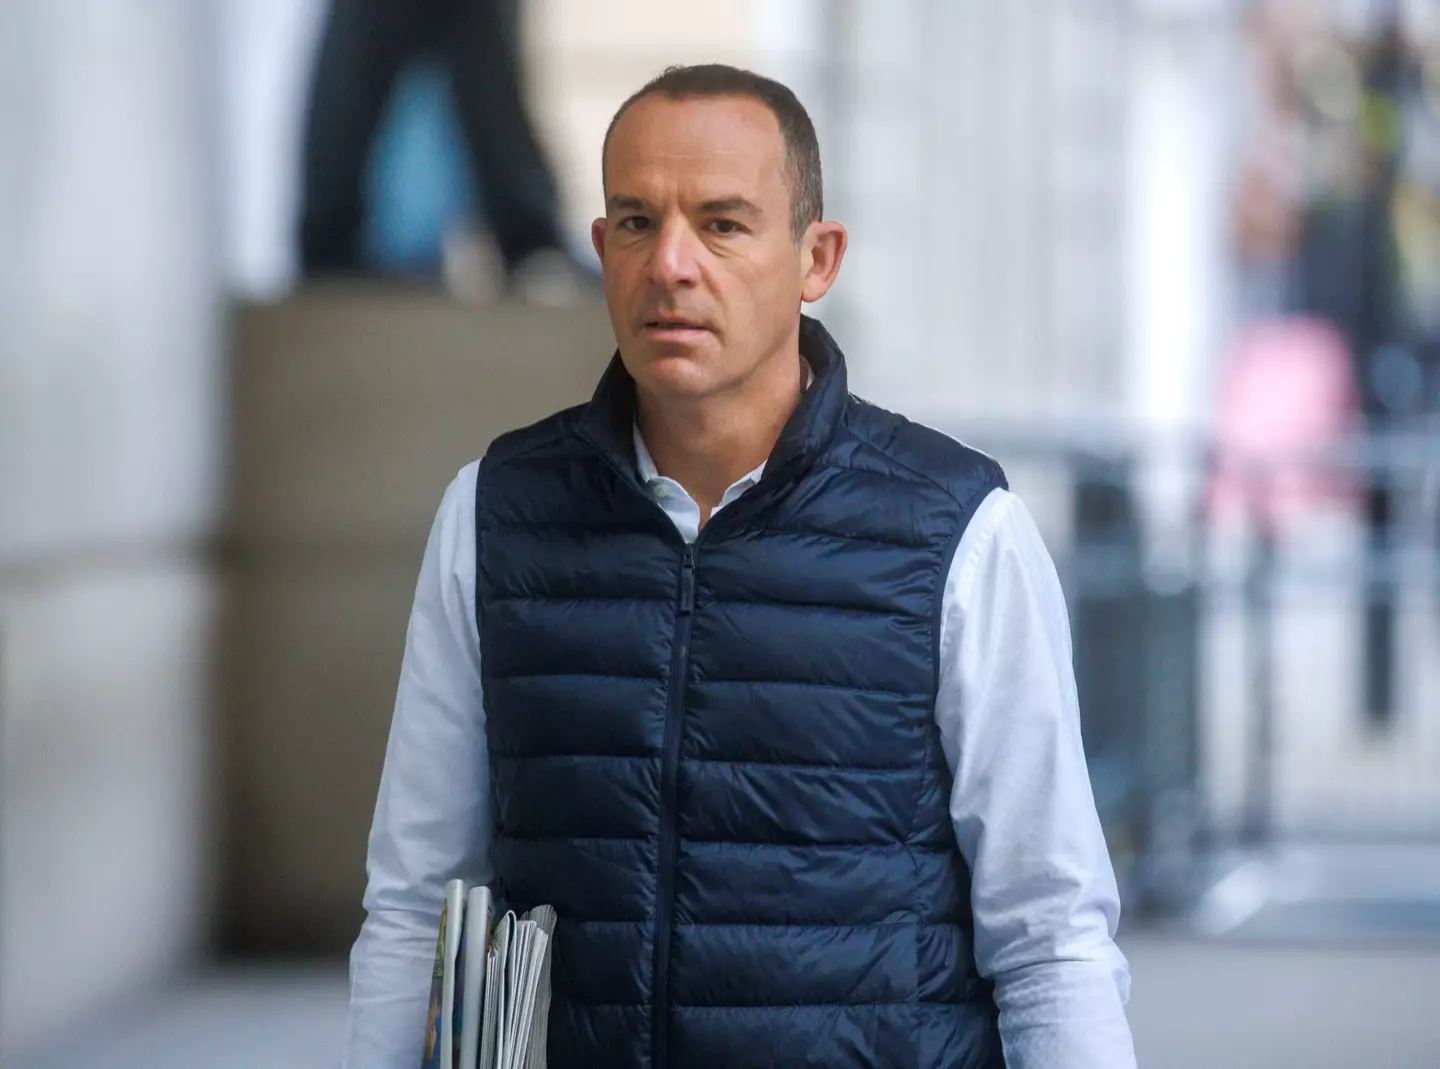 Martin Lewis has advised people who are earning less than £60,000 to do a 10-minute check to see if they could claim benefits.